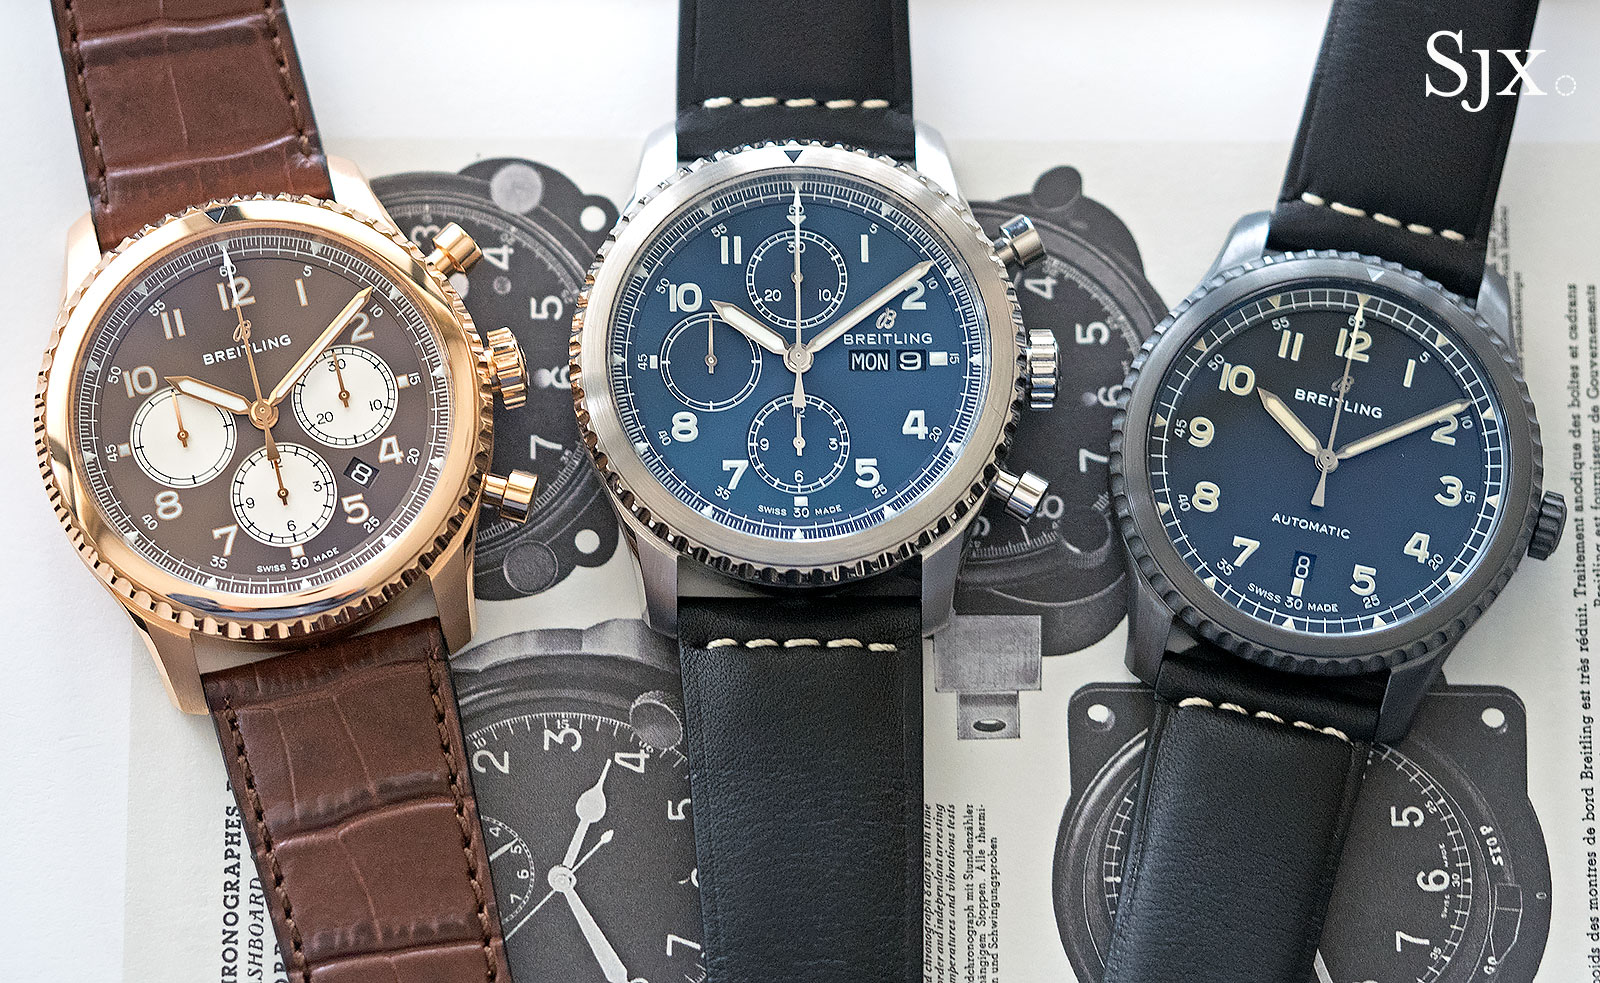 Breitling Navitimer 8 collection